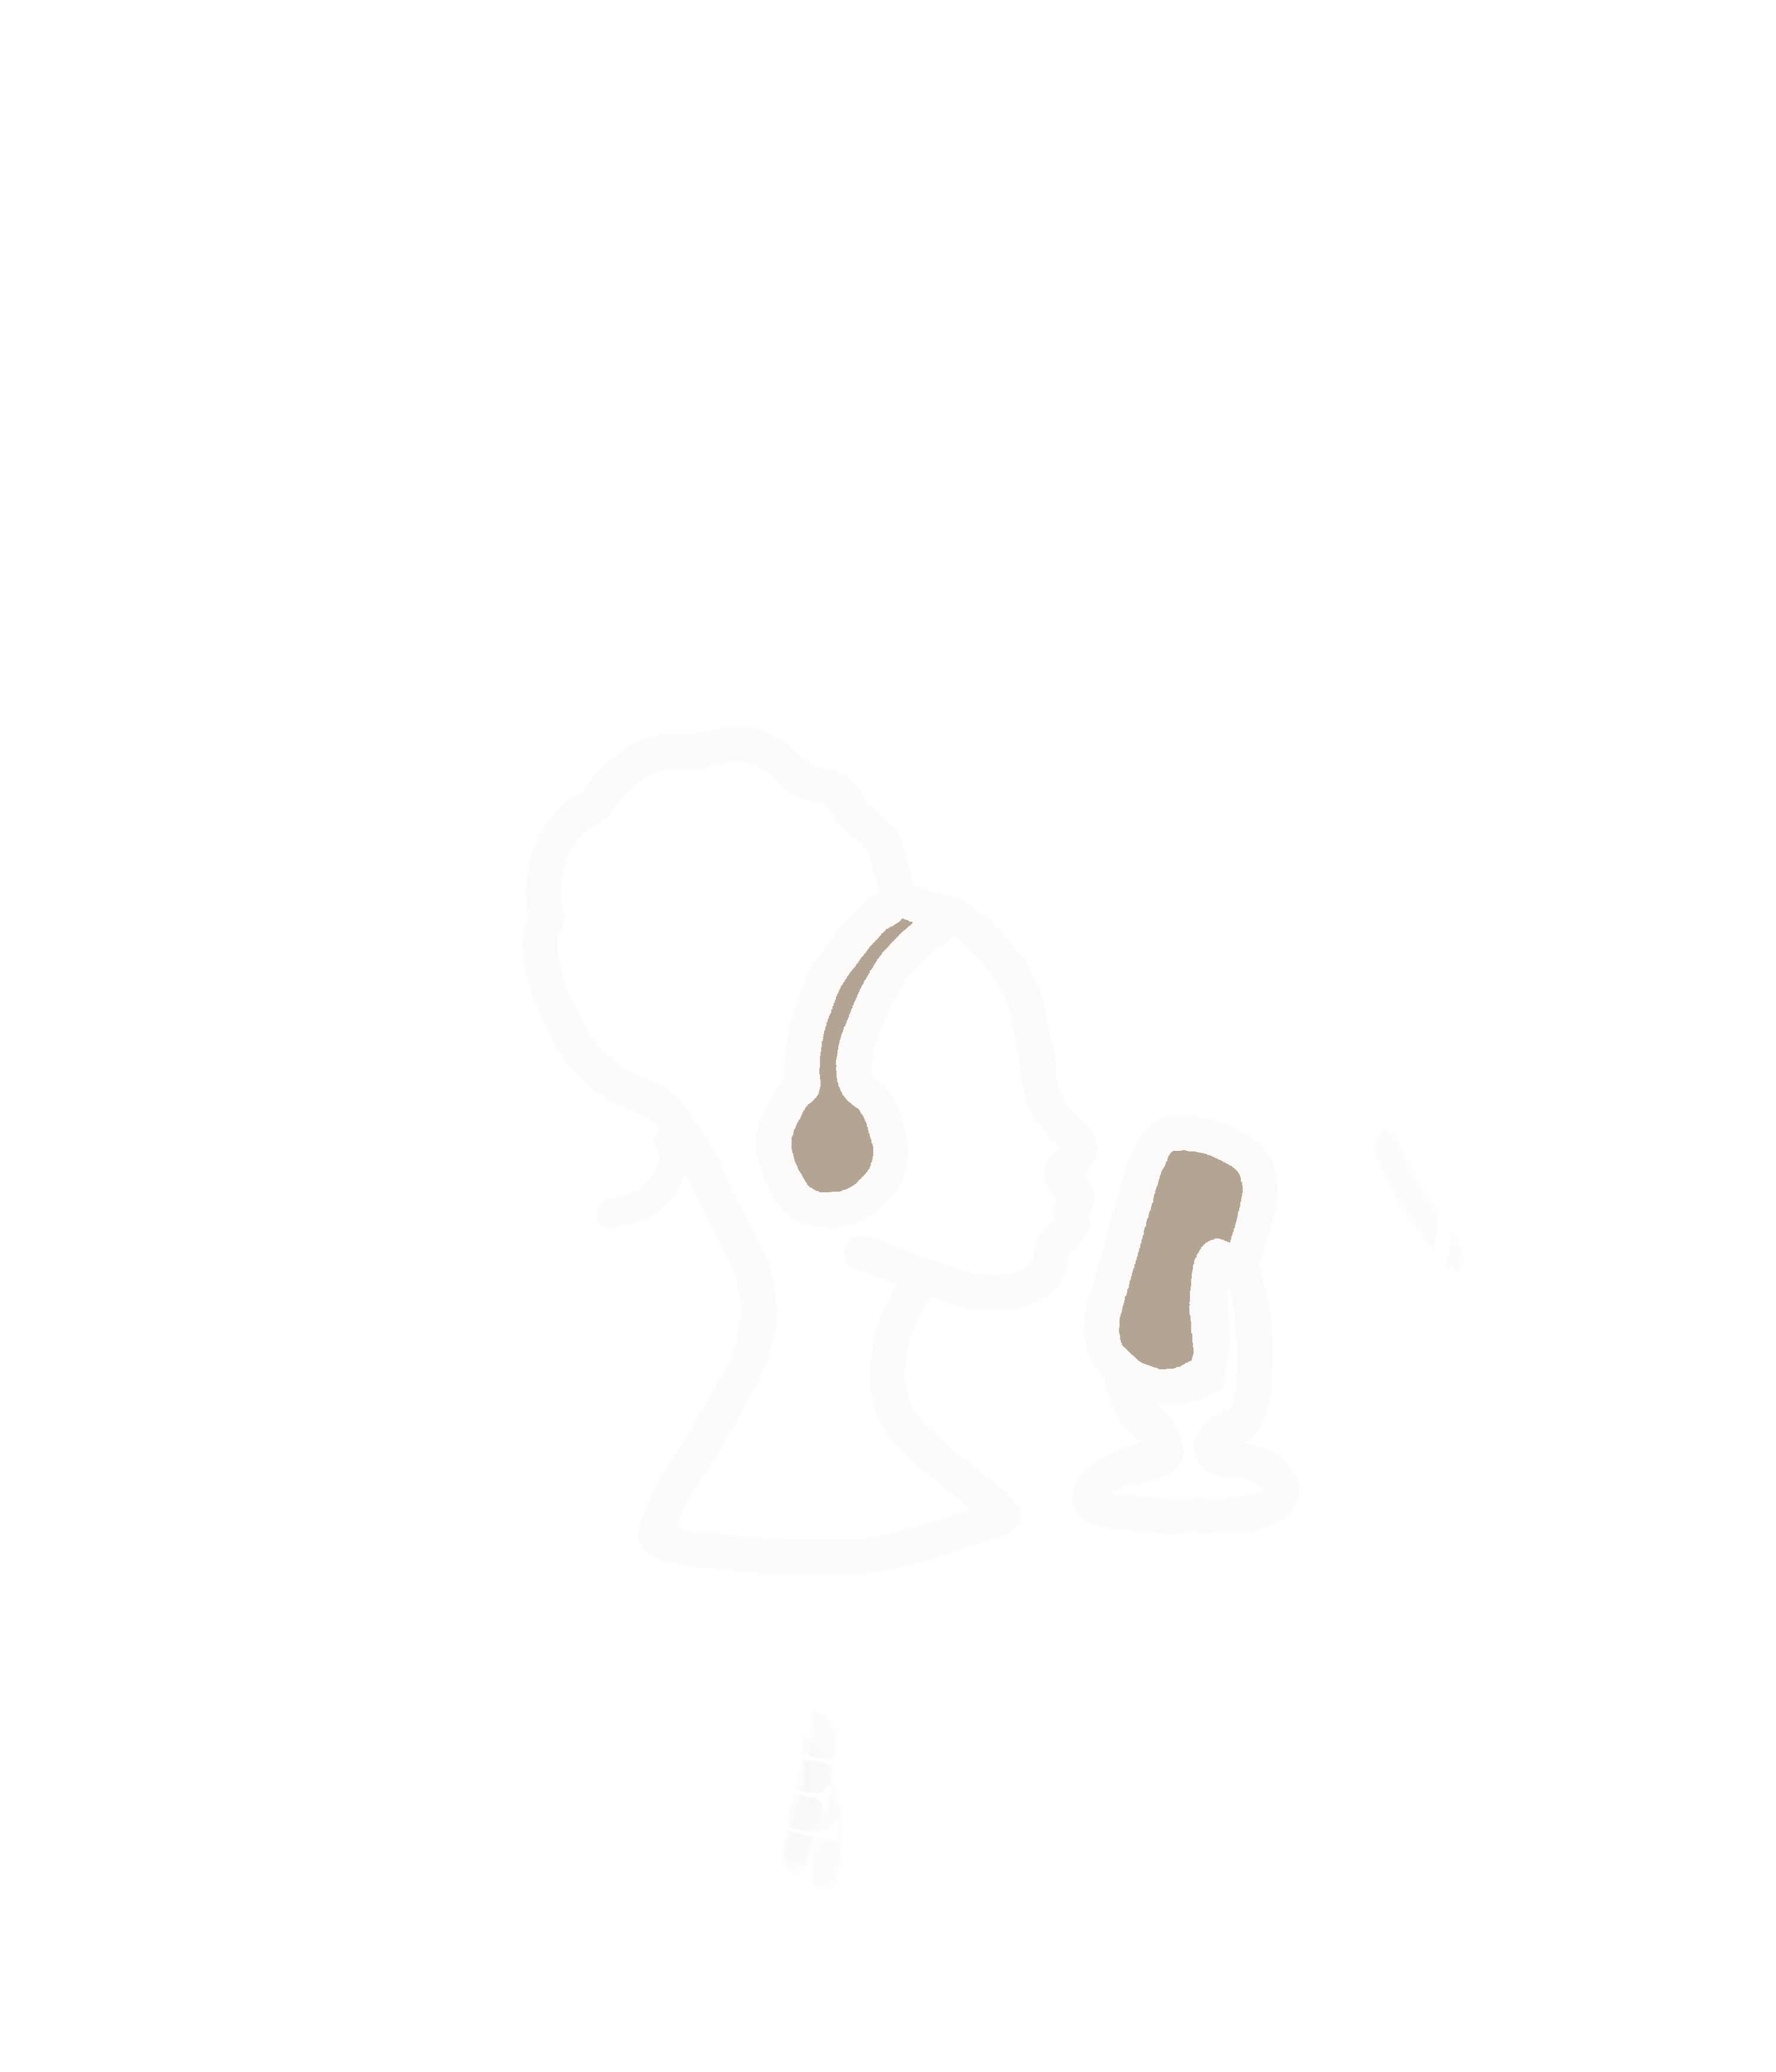 Christian Women Podcasters Network